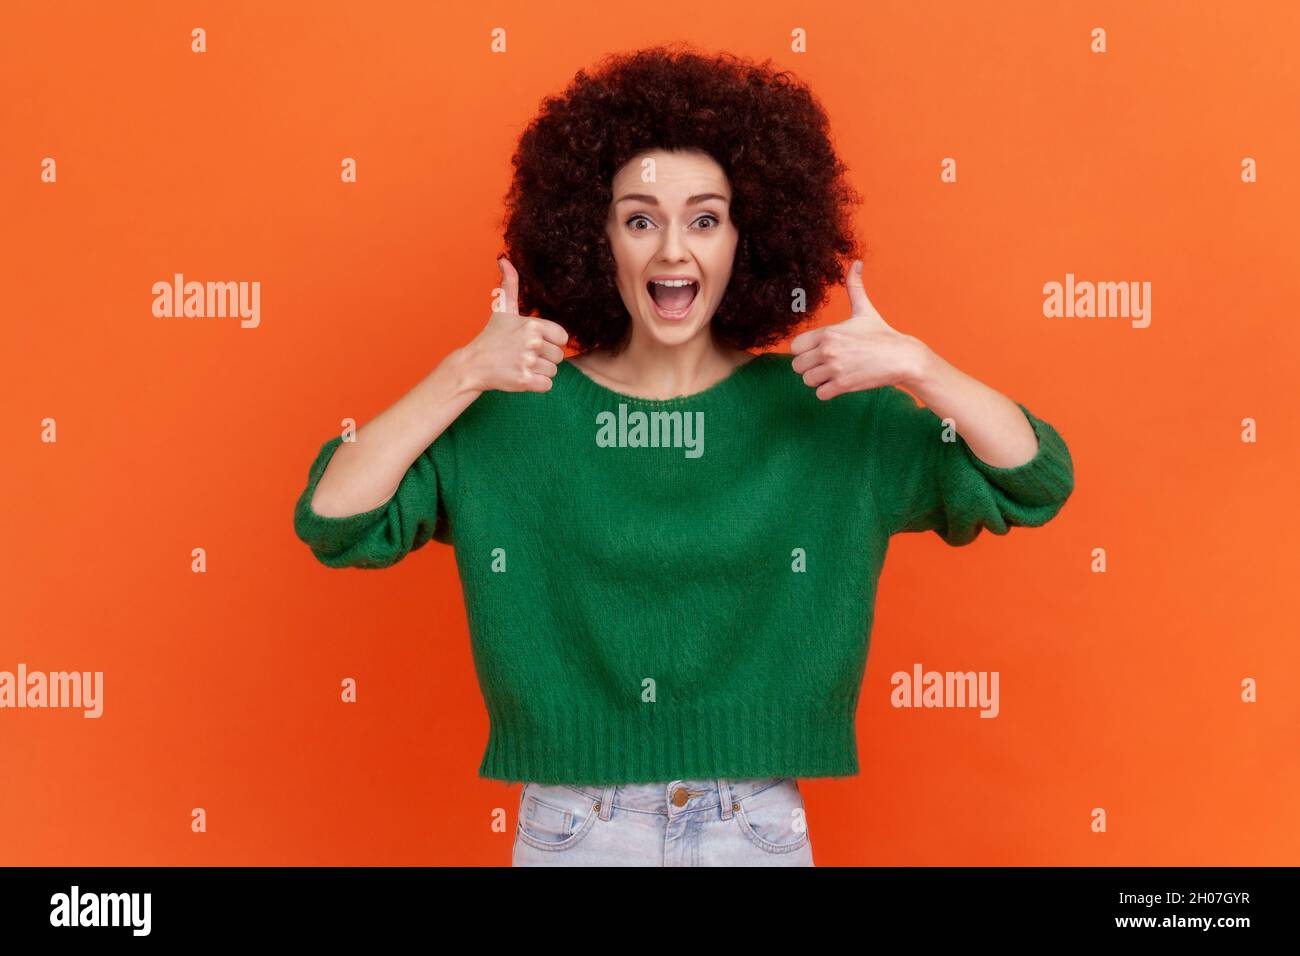 Amazed positive woman with Afro hairstyle wearing green casual style sweater standing showing thumb up with both hands, recommend content. Indoor studio shot isolated on orange background. Stock Photo